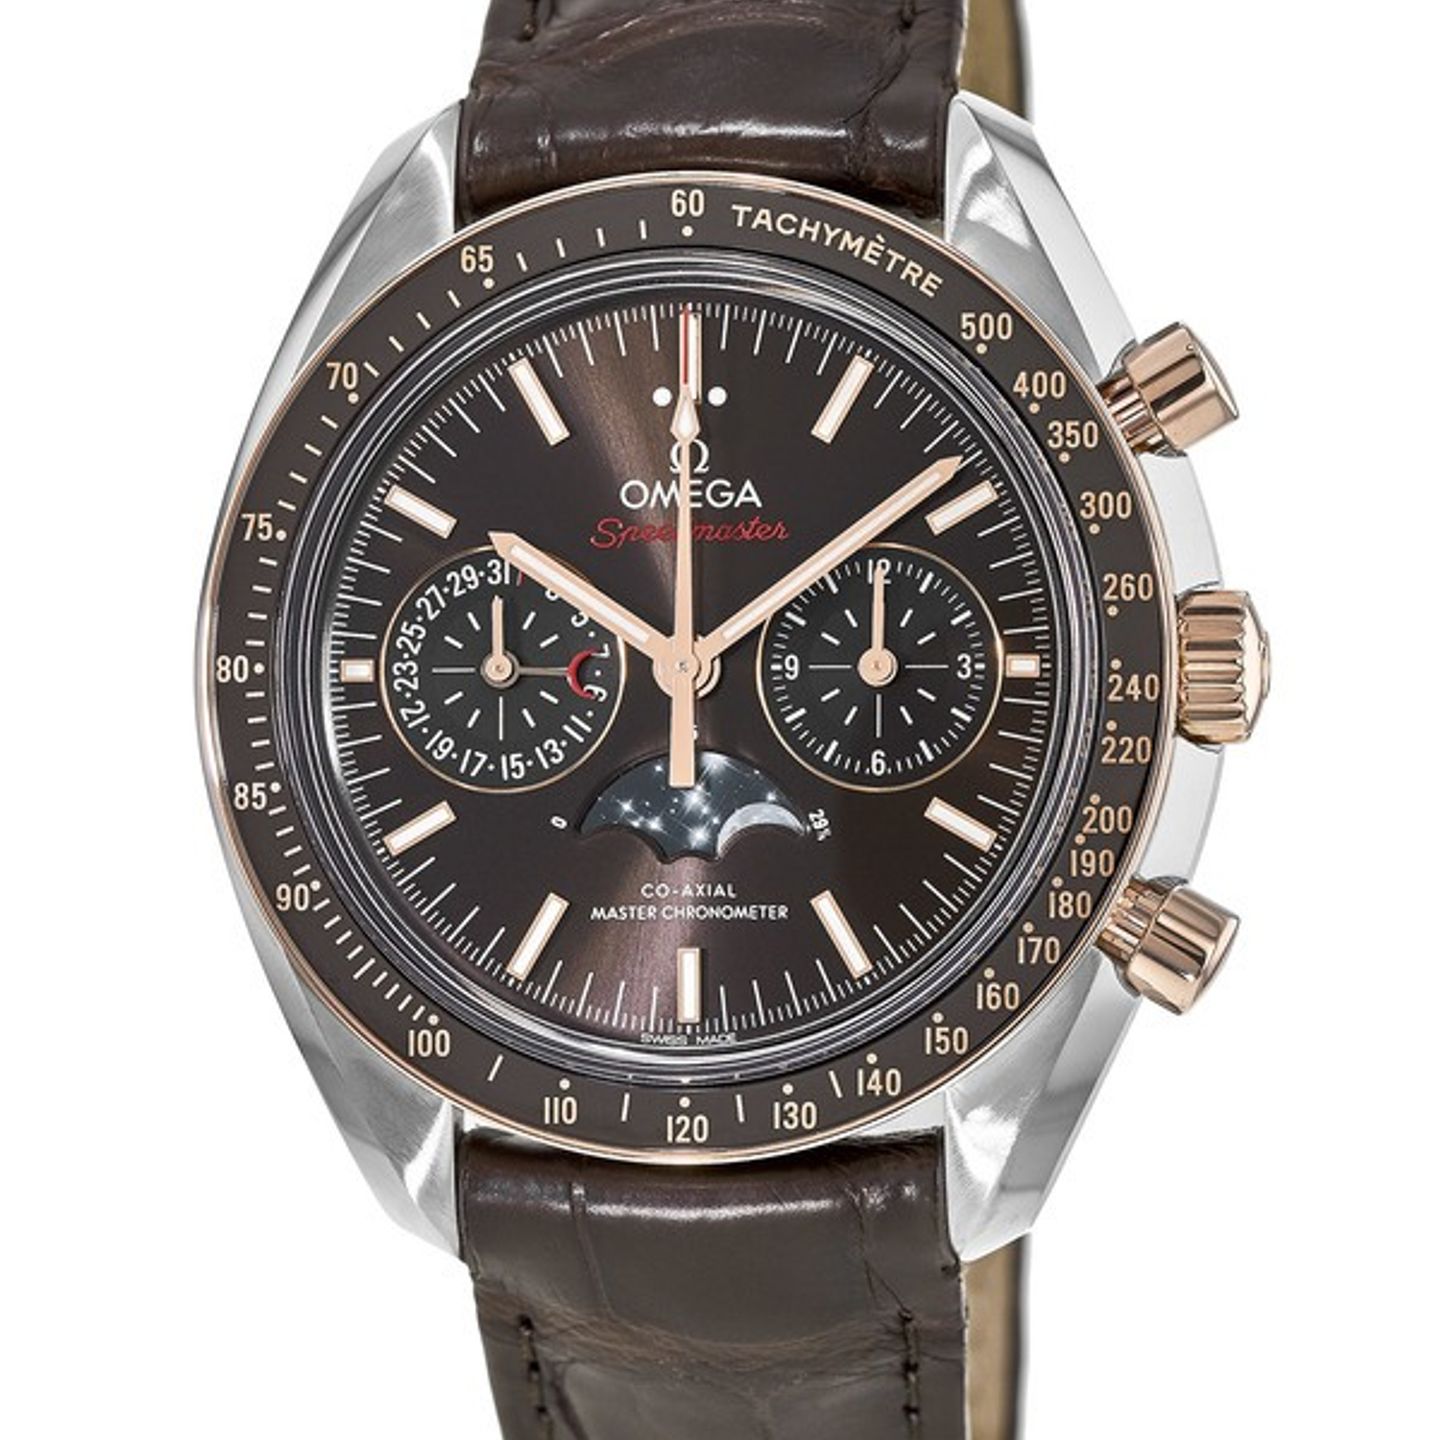 Omega Speedmaster Professional Moonwatch Moonphase 304.23.44.52.13.001 (2022) - Brown dial 44 mm Gold/Steel case (1/2)